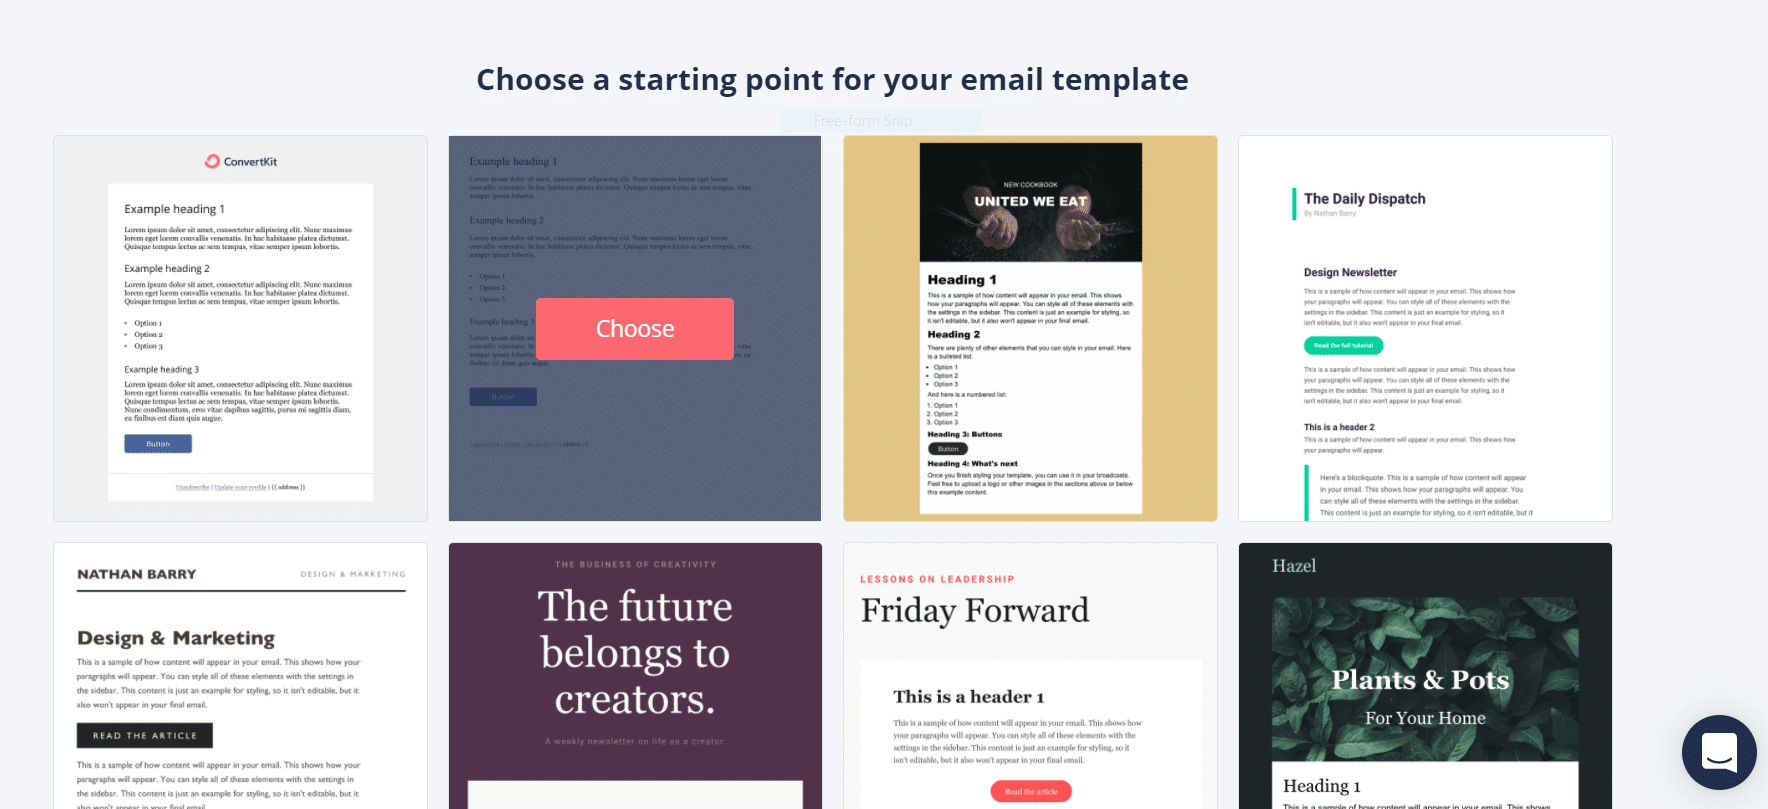 How to choose an email template in ConvertKit